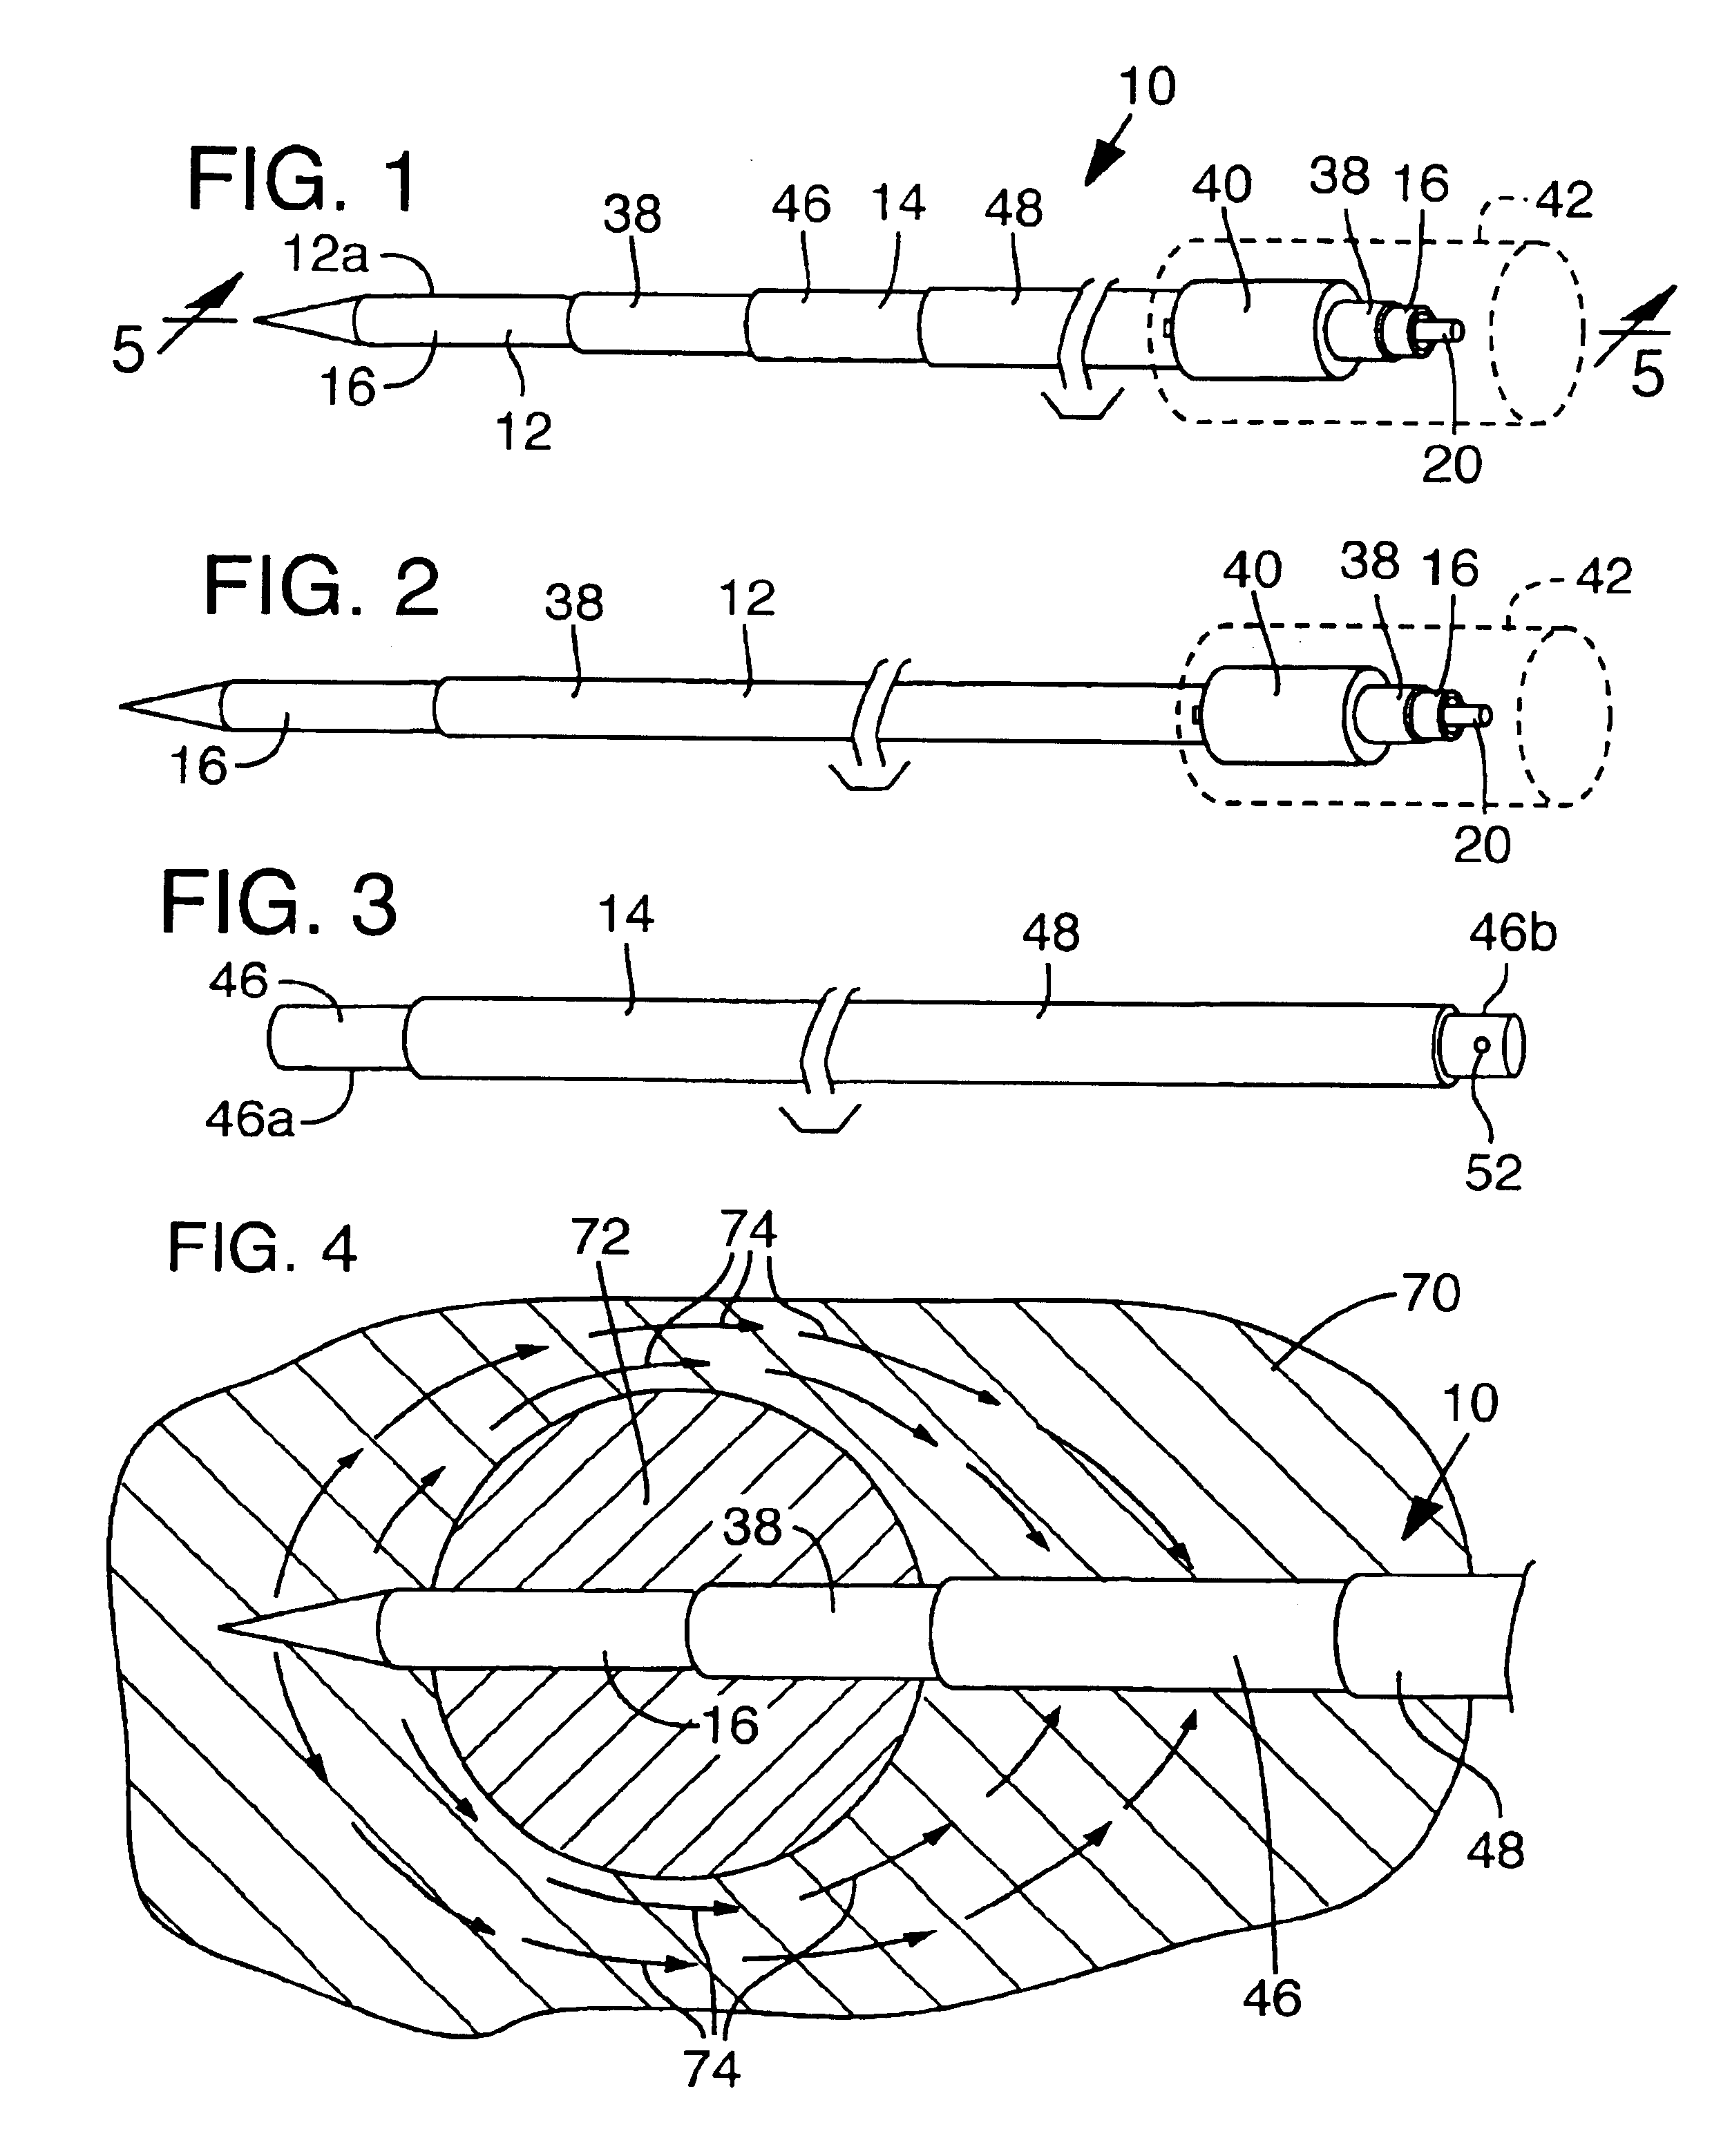 Cryo-surgical apparatus and method of use